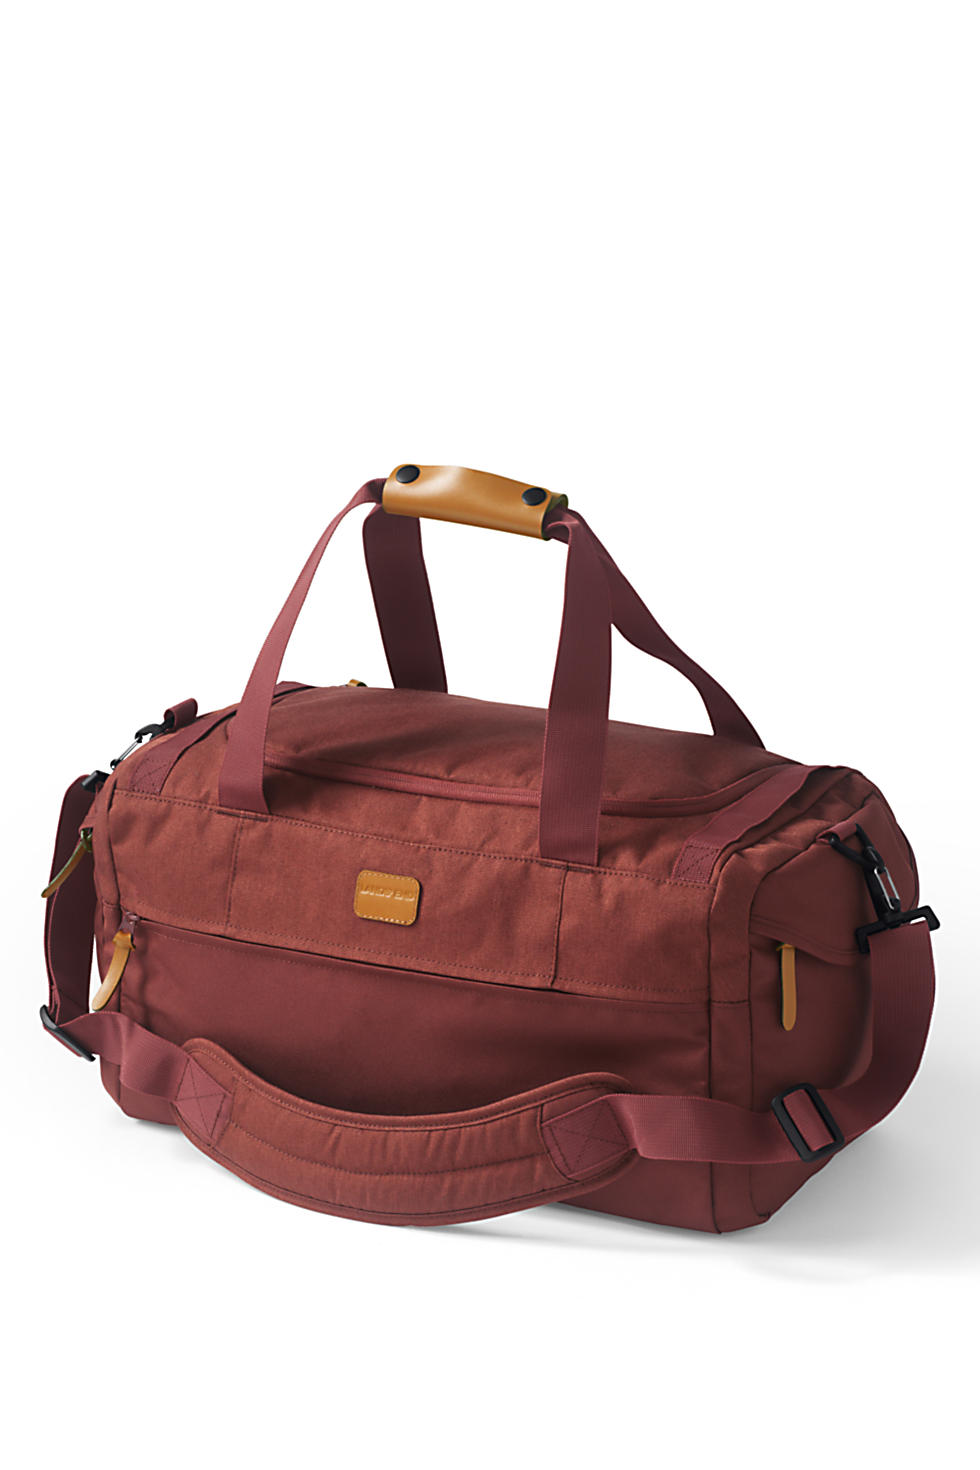 Lands End Small Everyday Travel Duffle Bag